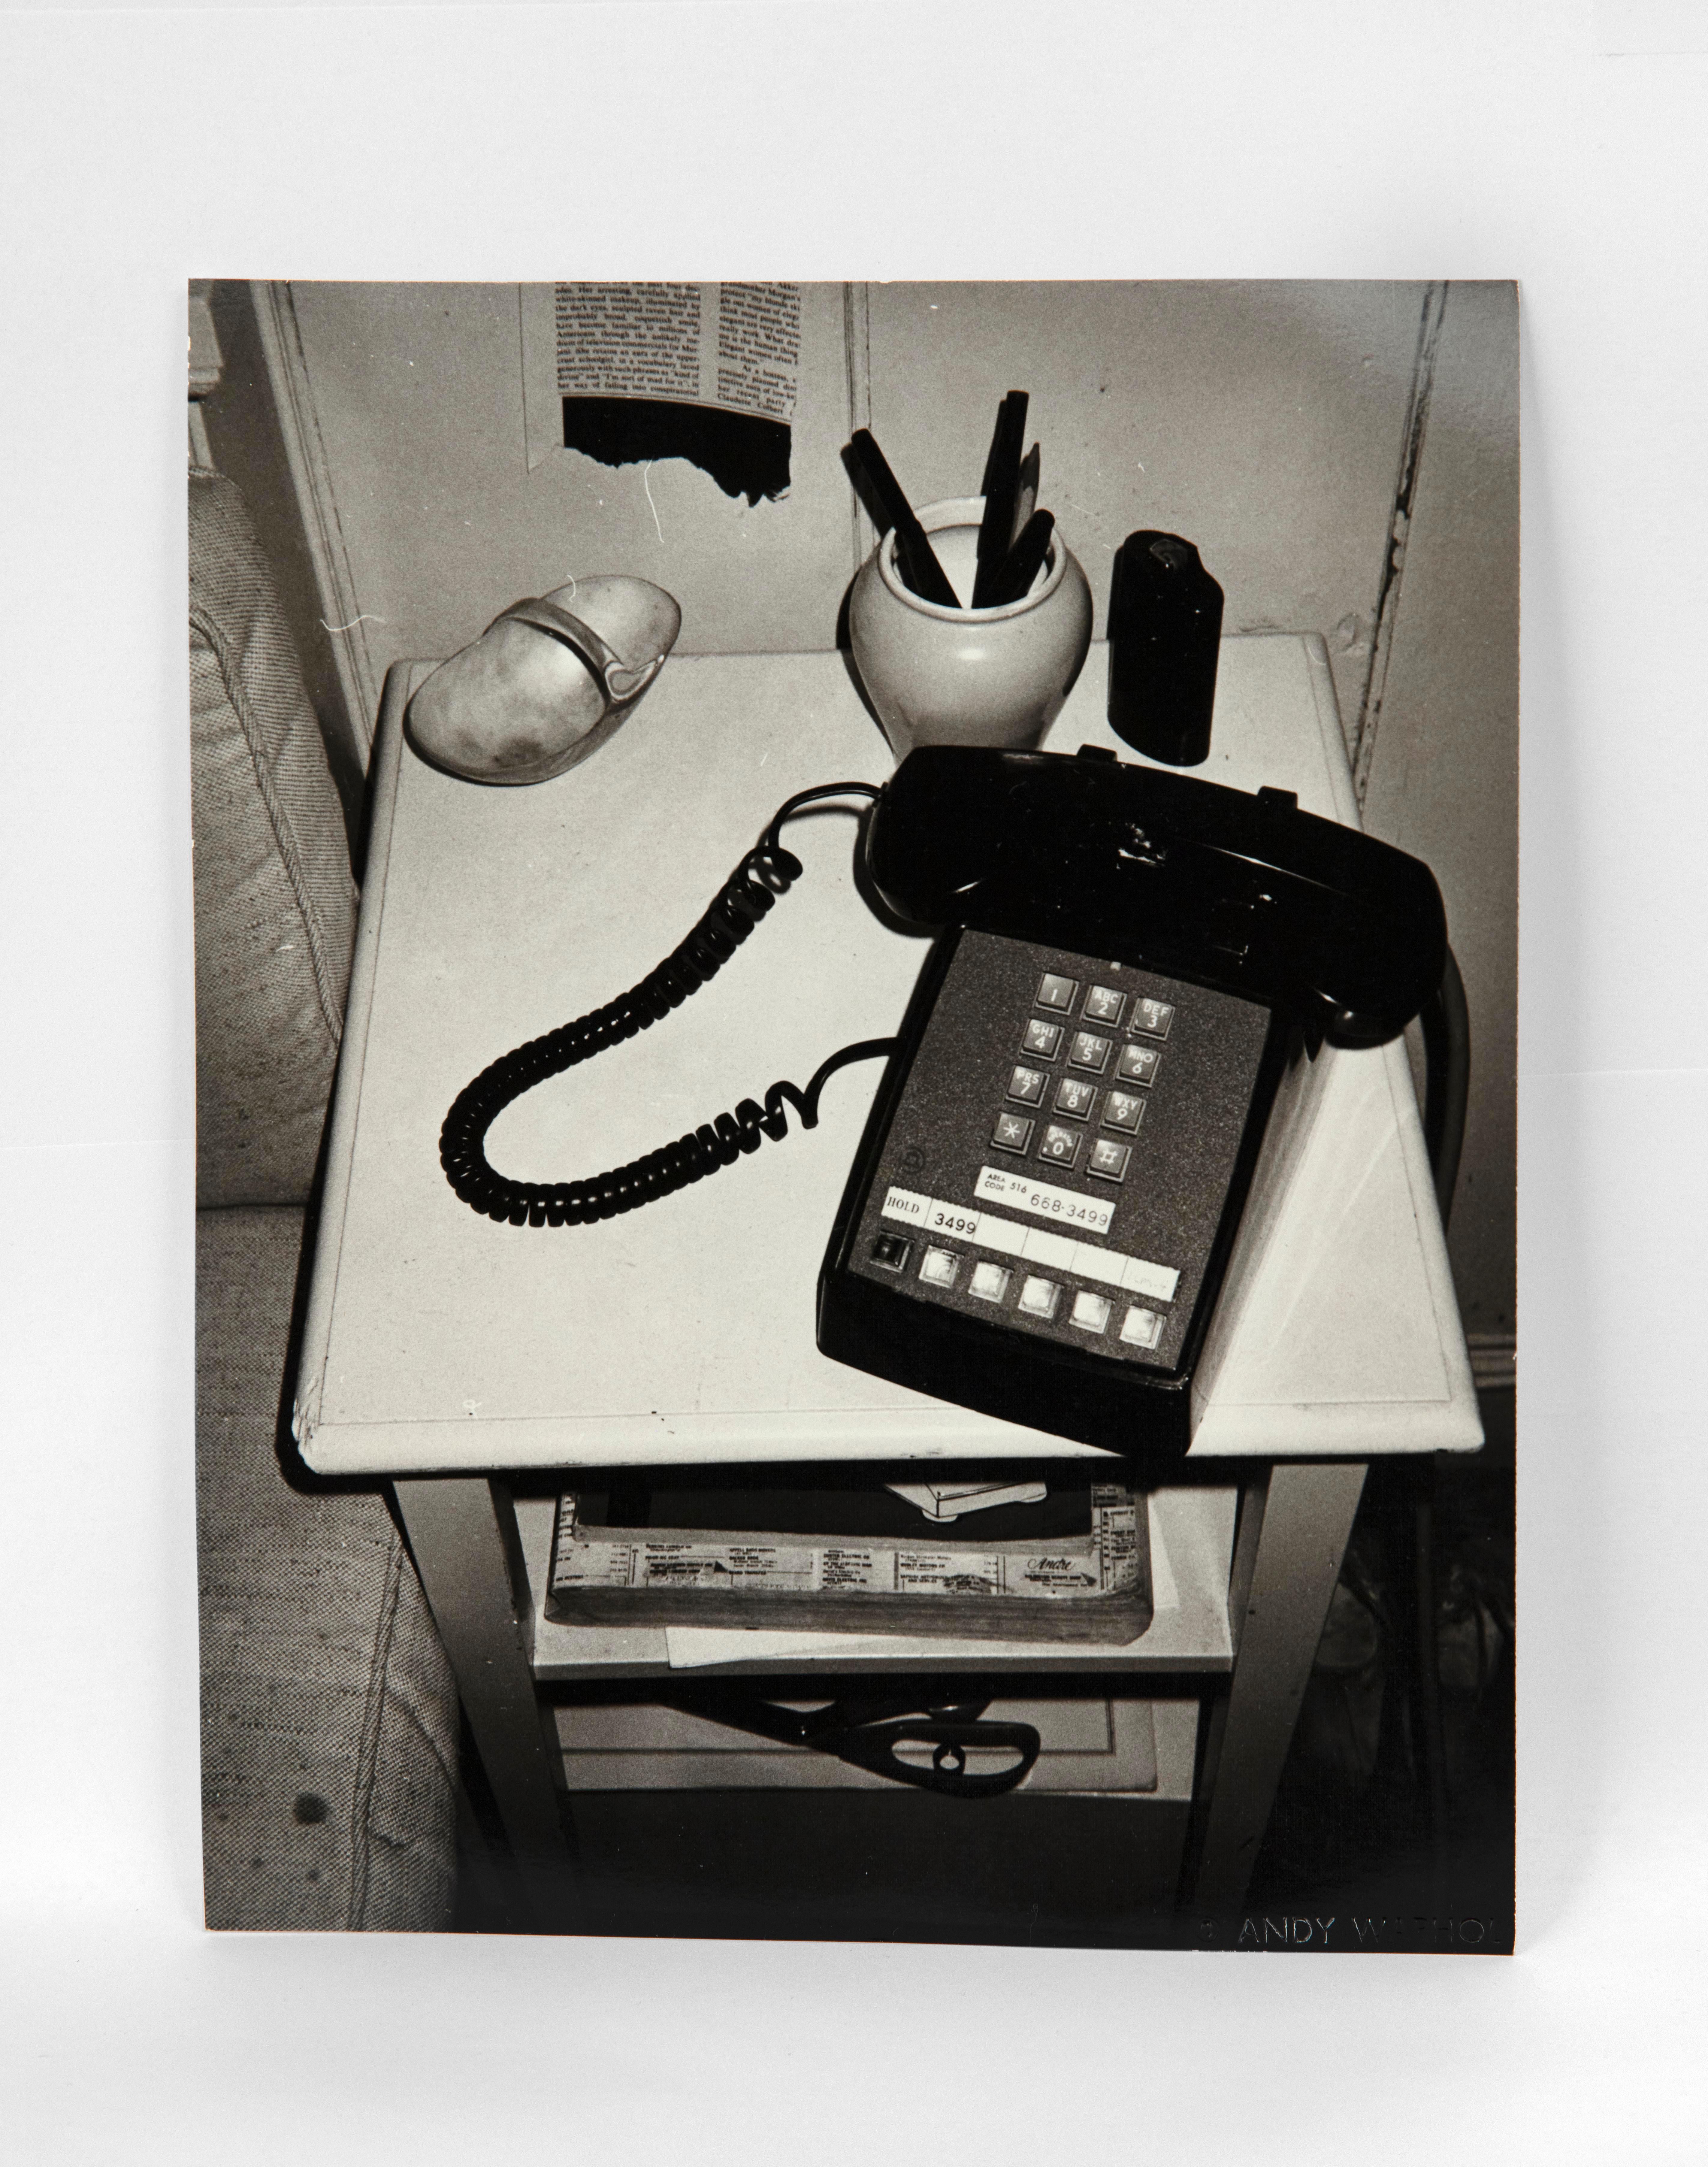 Black and White Photograph Andy Warhol - téléphone portable